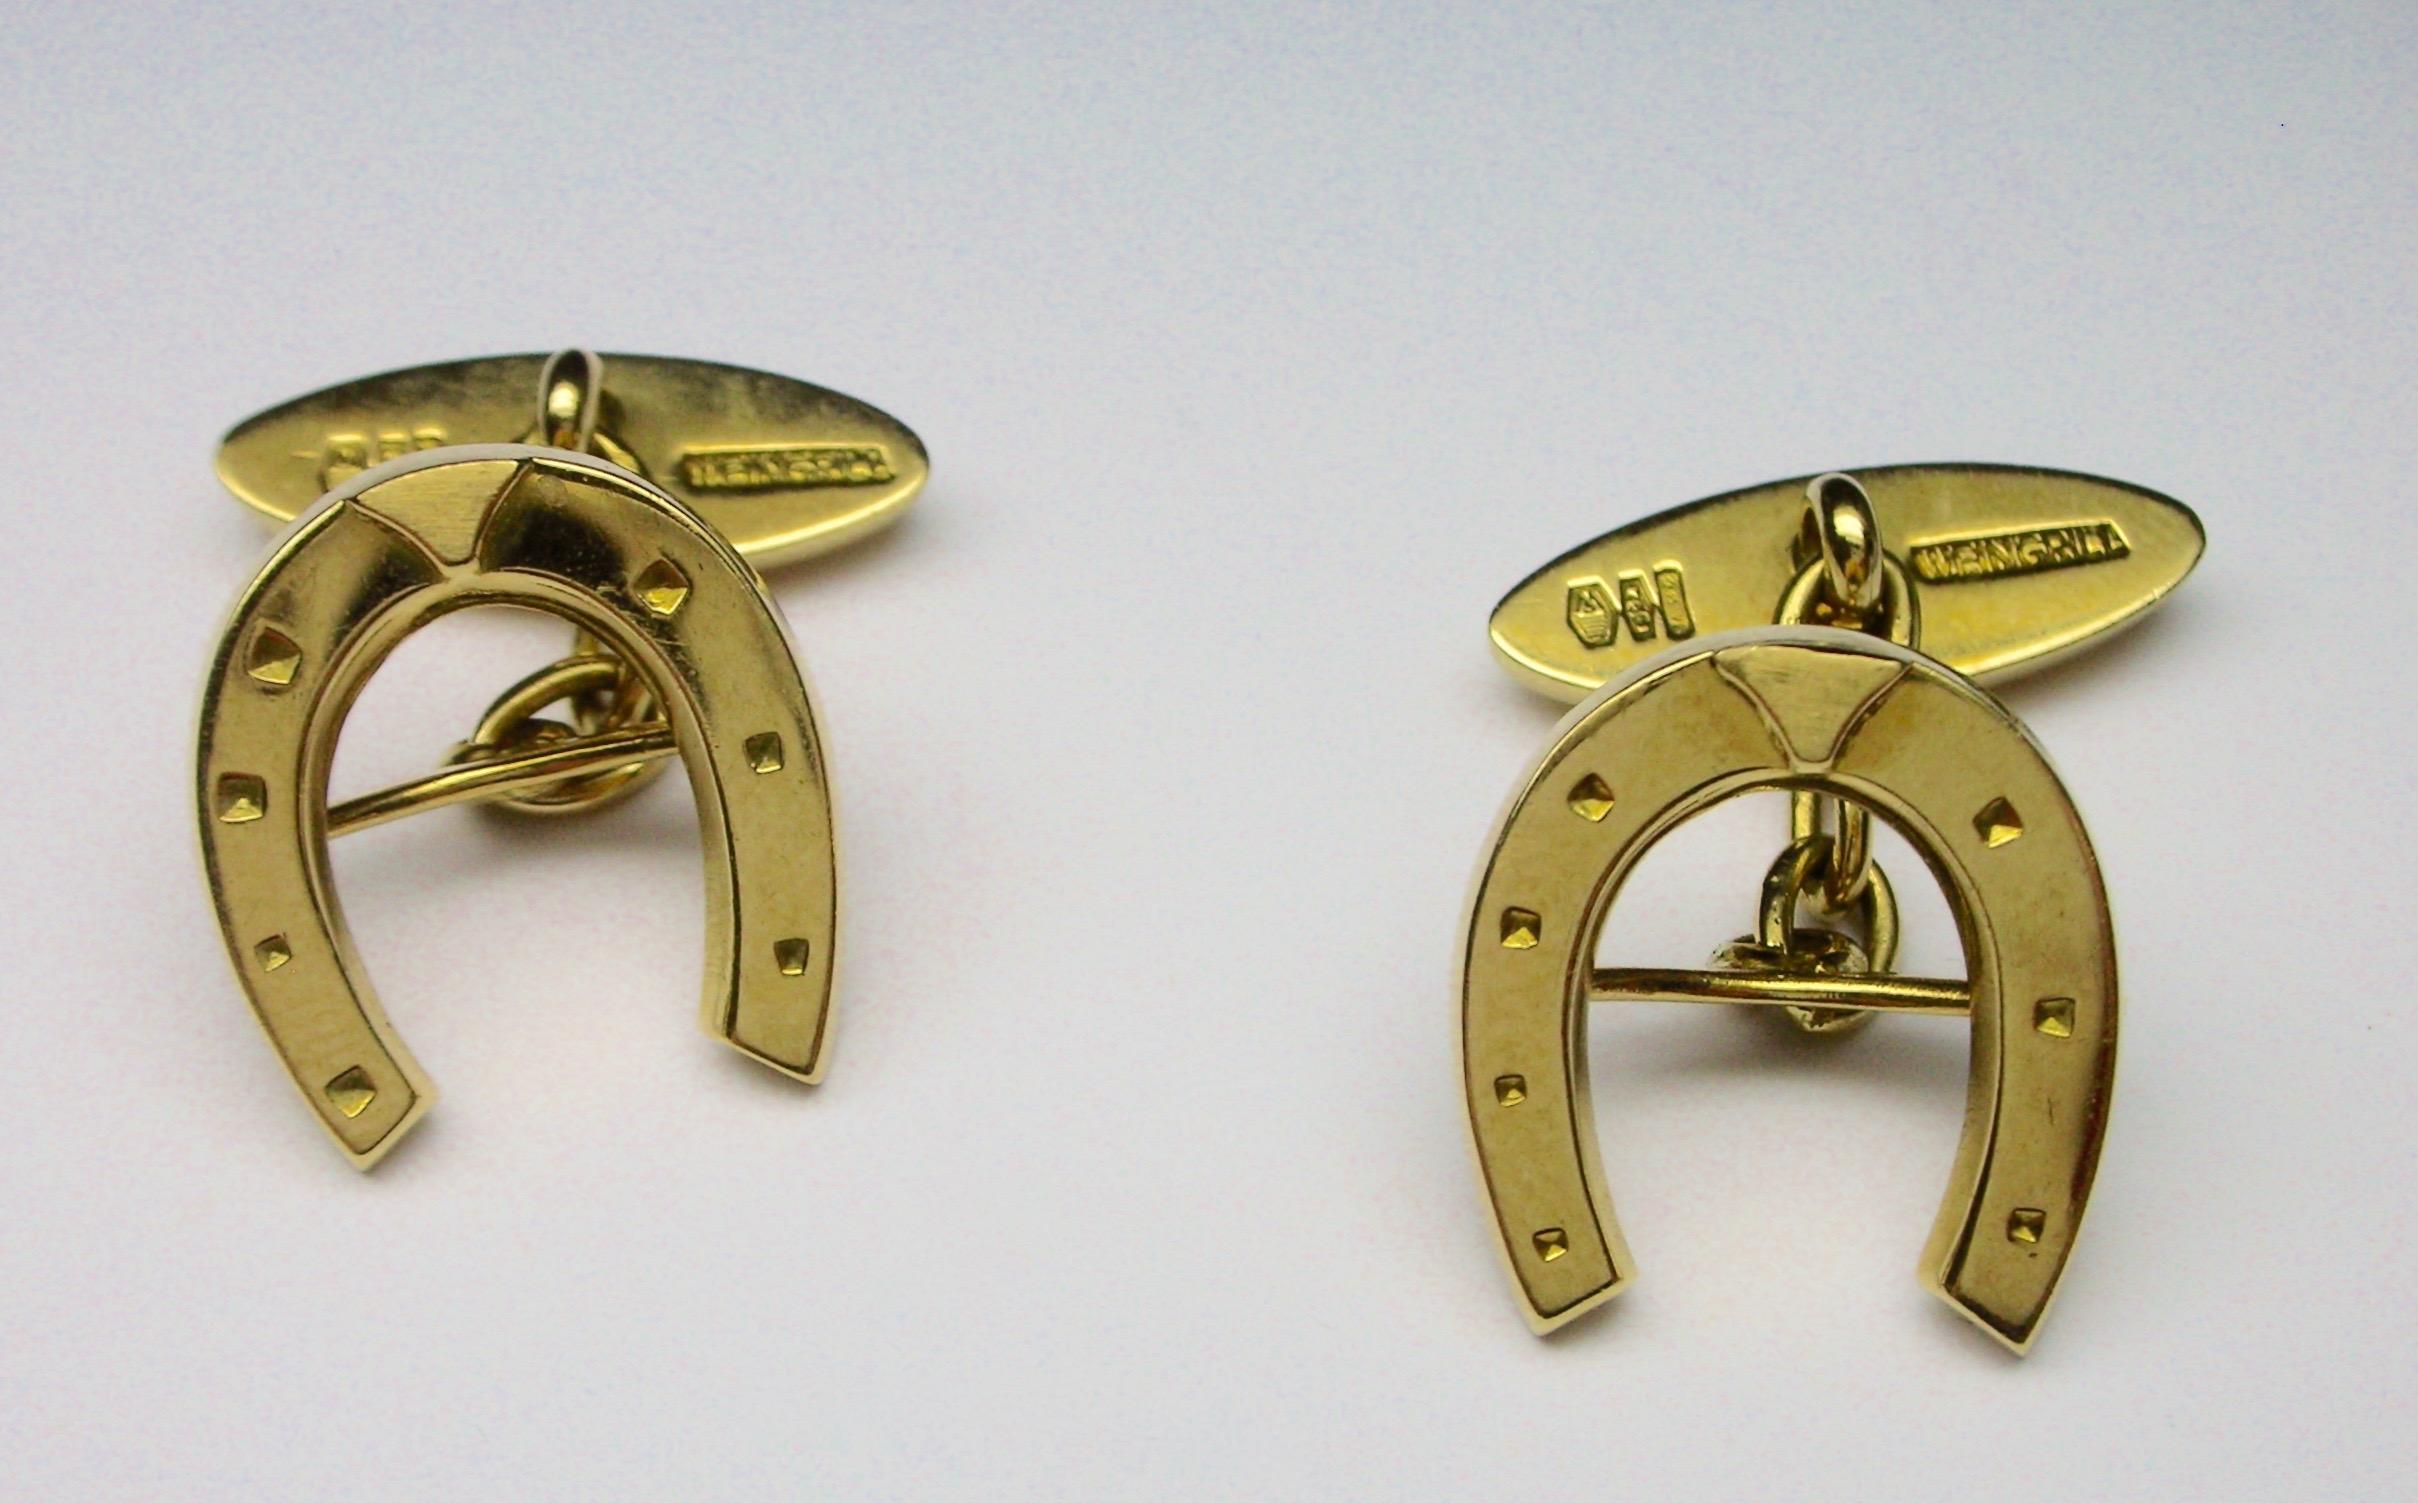 Horseshoe cufflinks in 18KT gold signed by Weingrill, from the 1980's circa, hallmarks show they are Made in Italy. 

